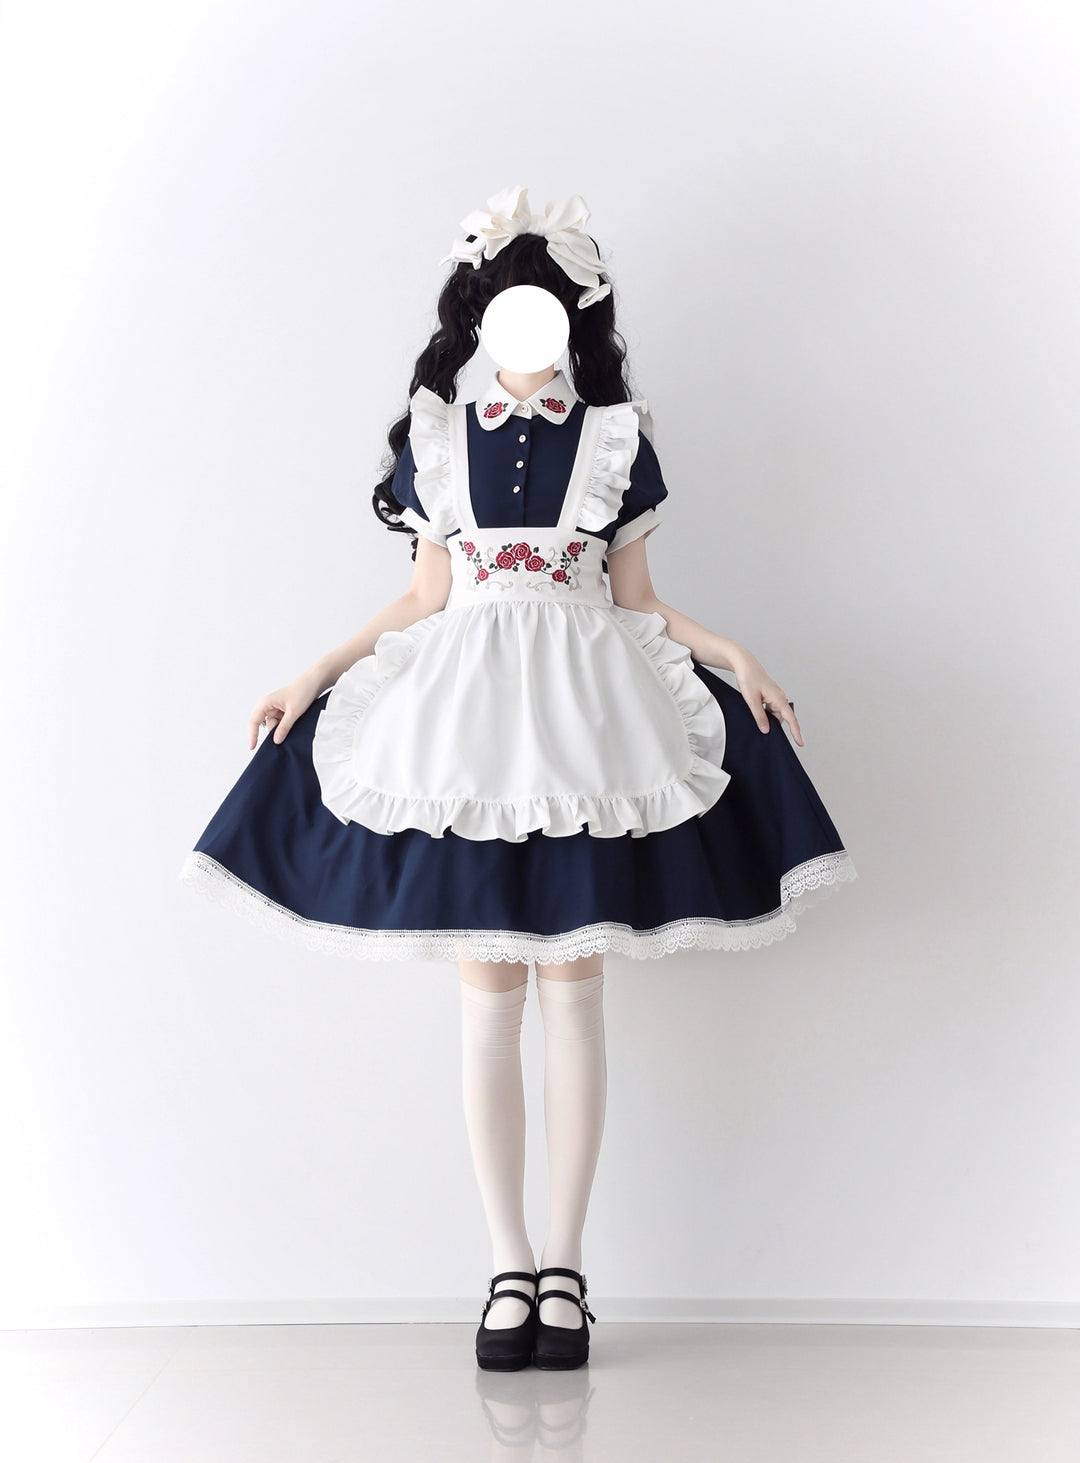 Witch Craft~Posey Nina~Maid Lolita OP Dress Elegant Embroidered Apron Lolita Outfit 37342:558488